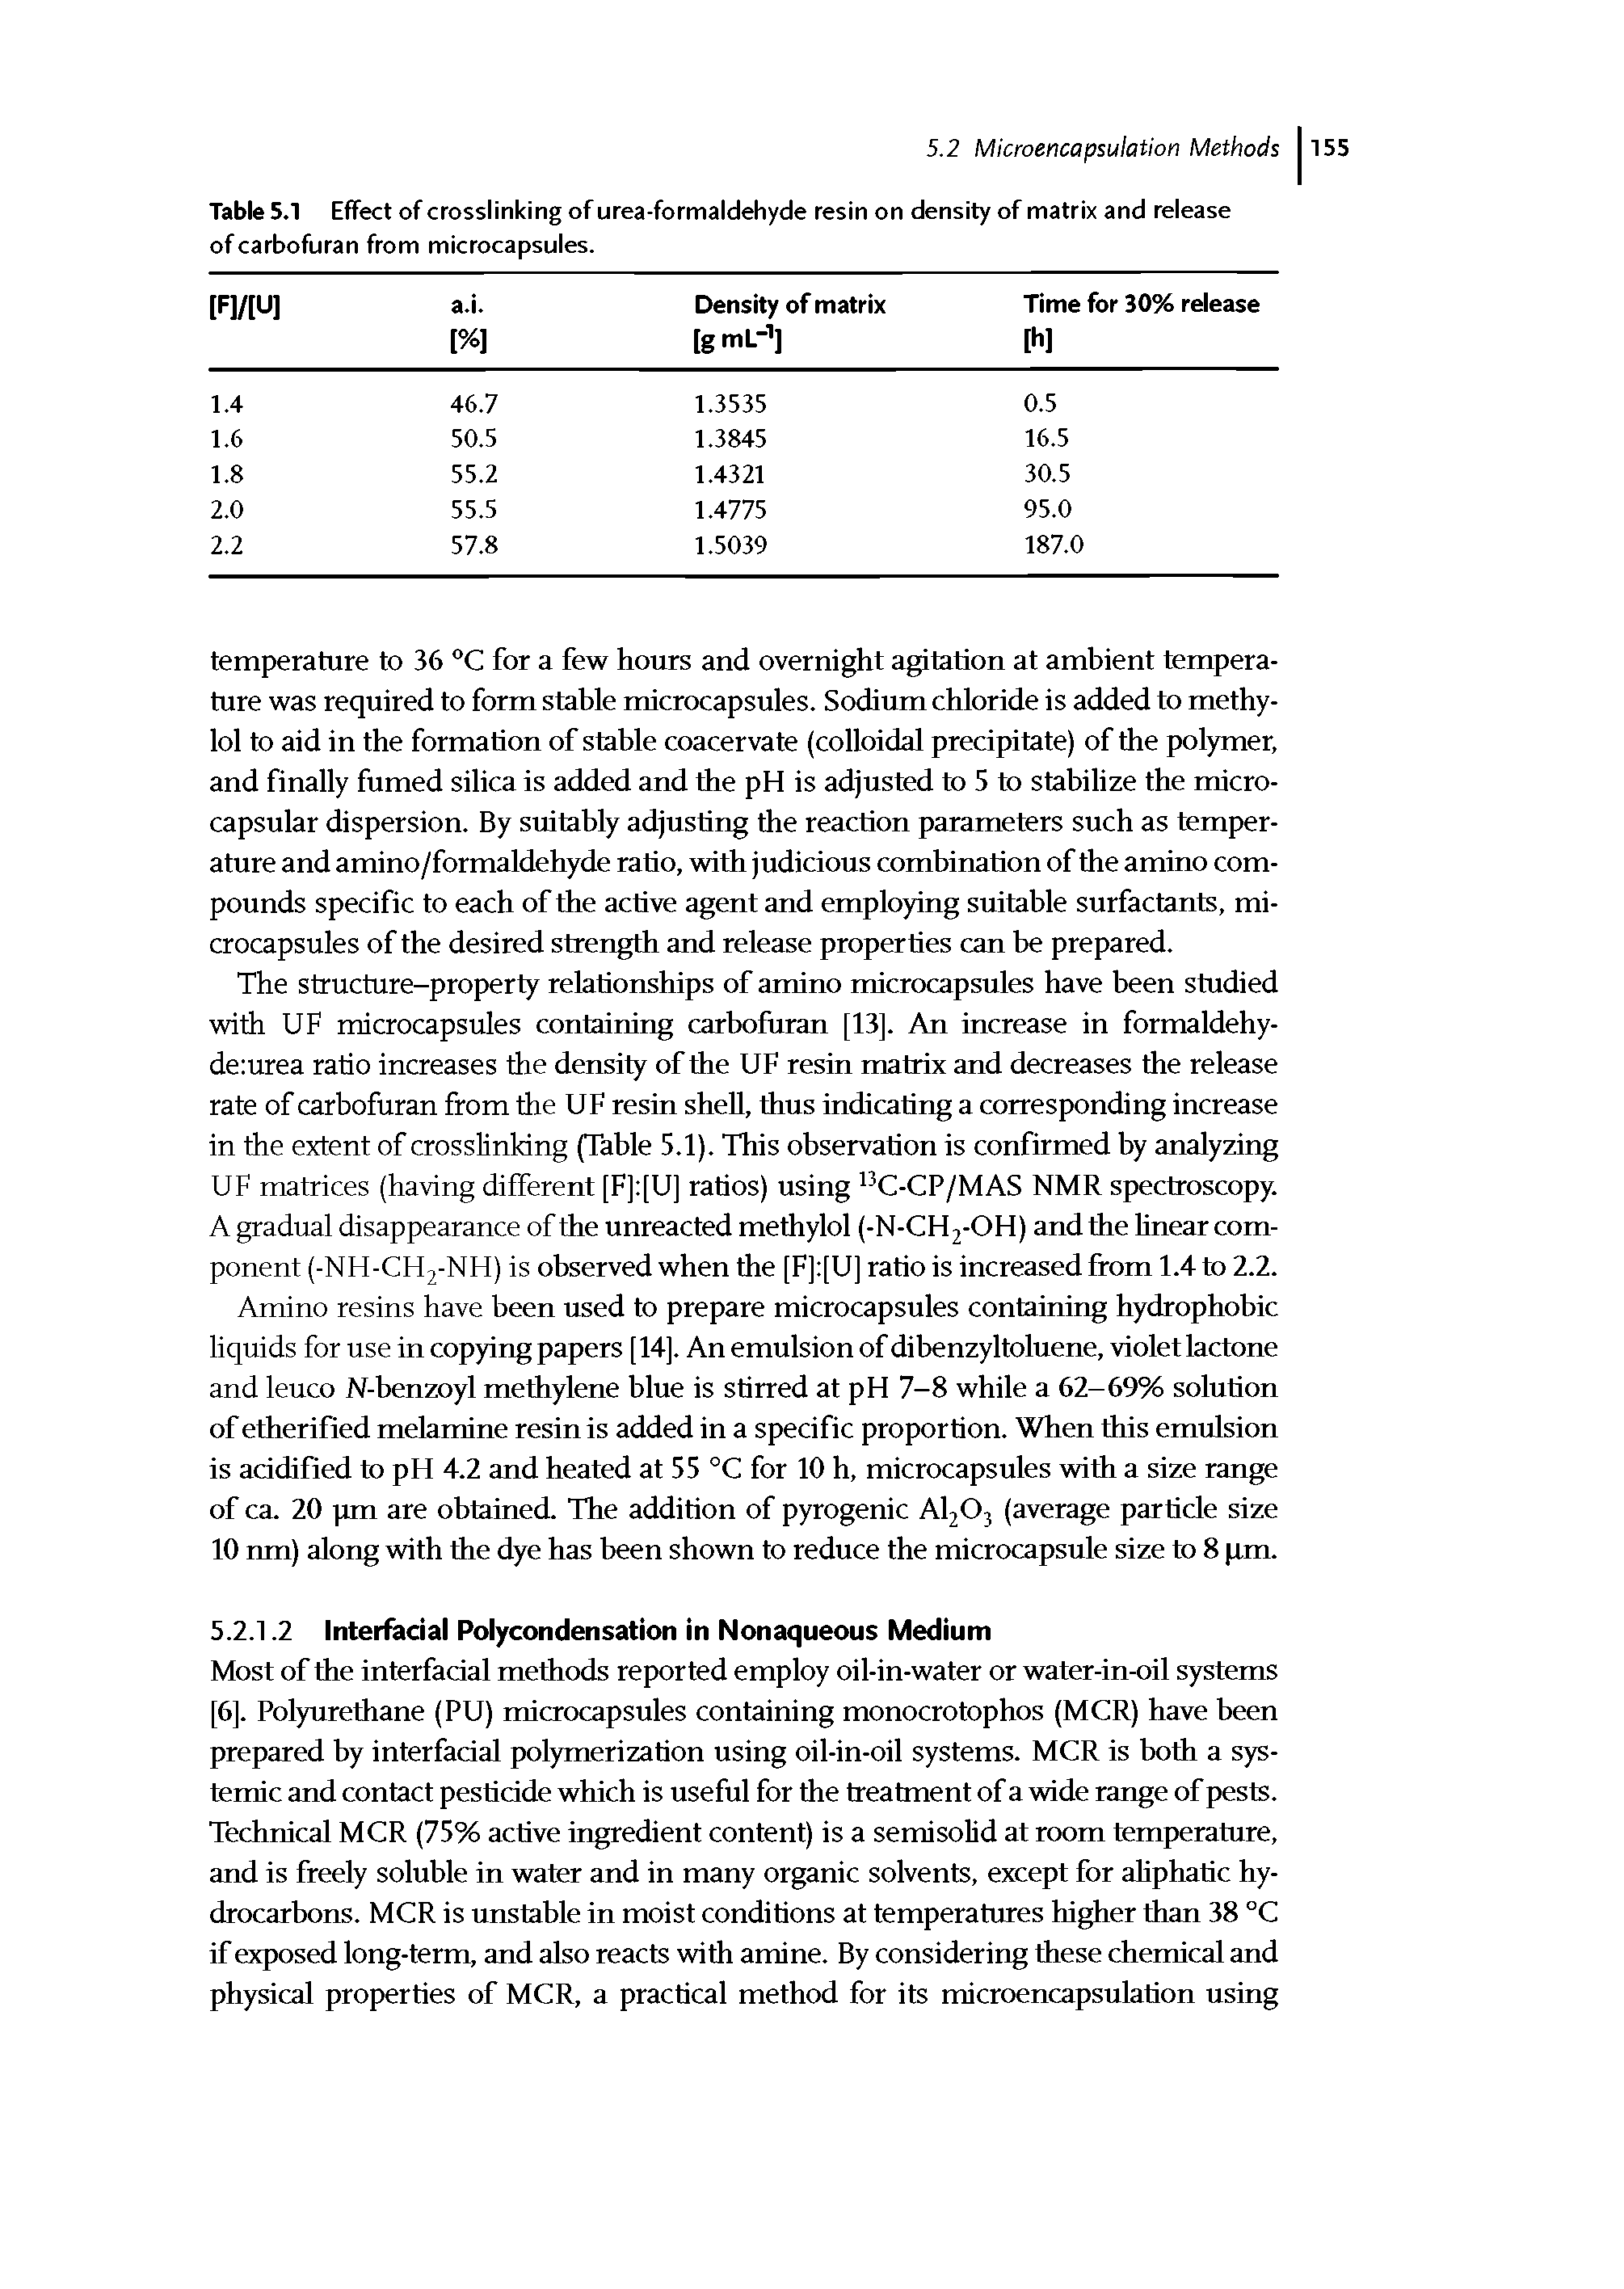 Table 5.1 Effect of crosslinking of urea-formaldehyde resin on density of matrix and release ofcarbofuran from microcapsules.